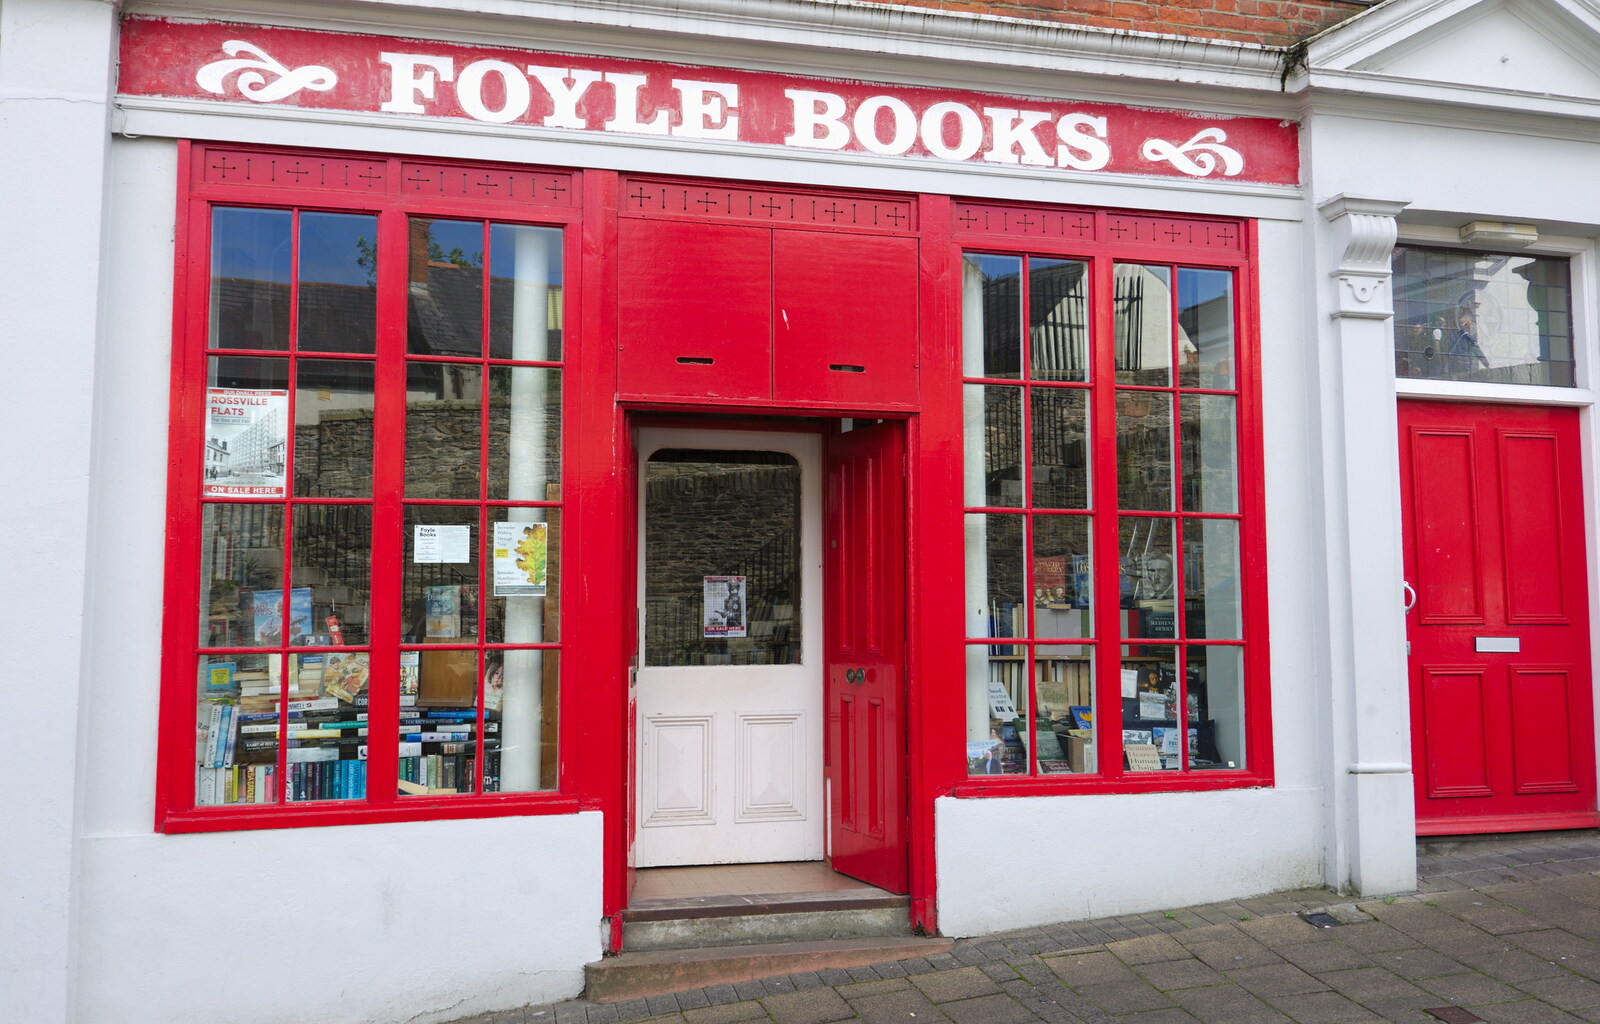 The red-and-white Foyle Books from A Day in Derry, County Londonderry, Northern Ireland - 15th August 2019